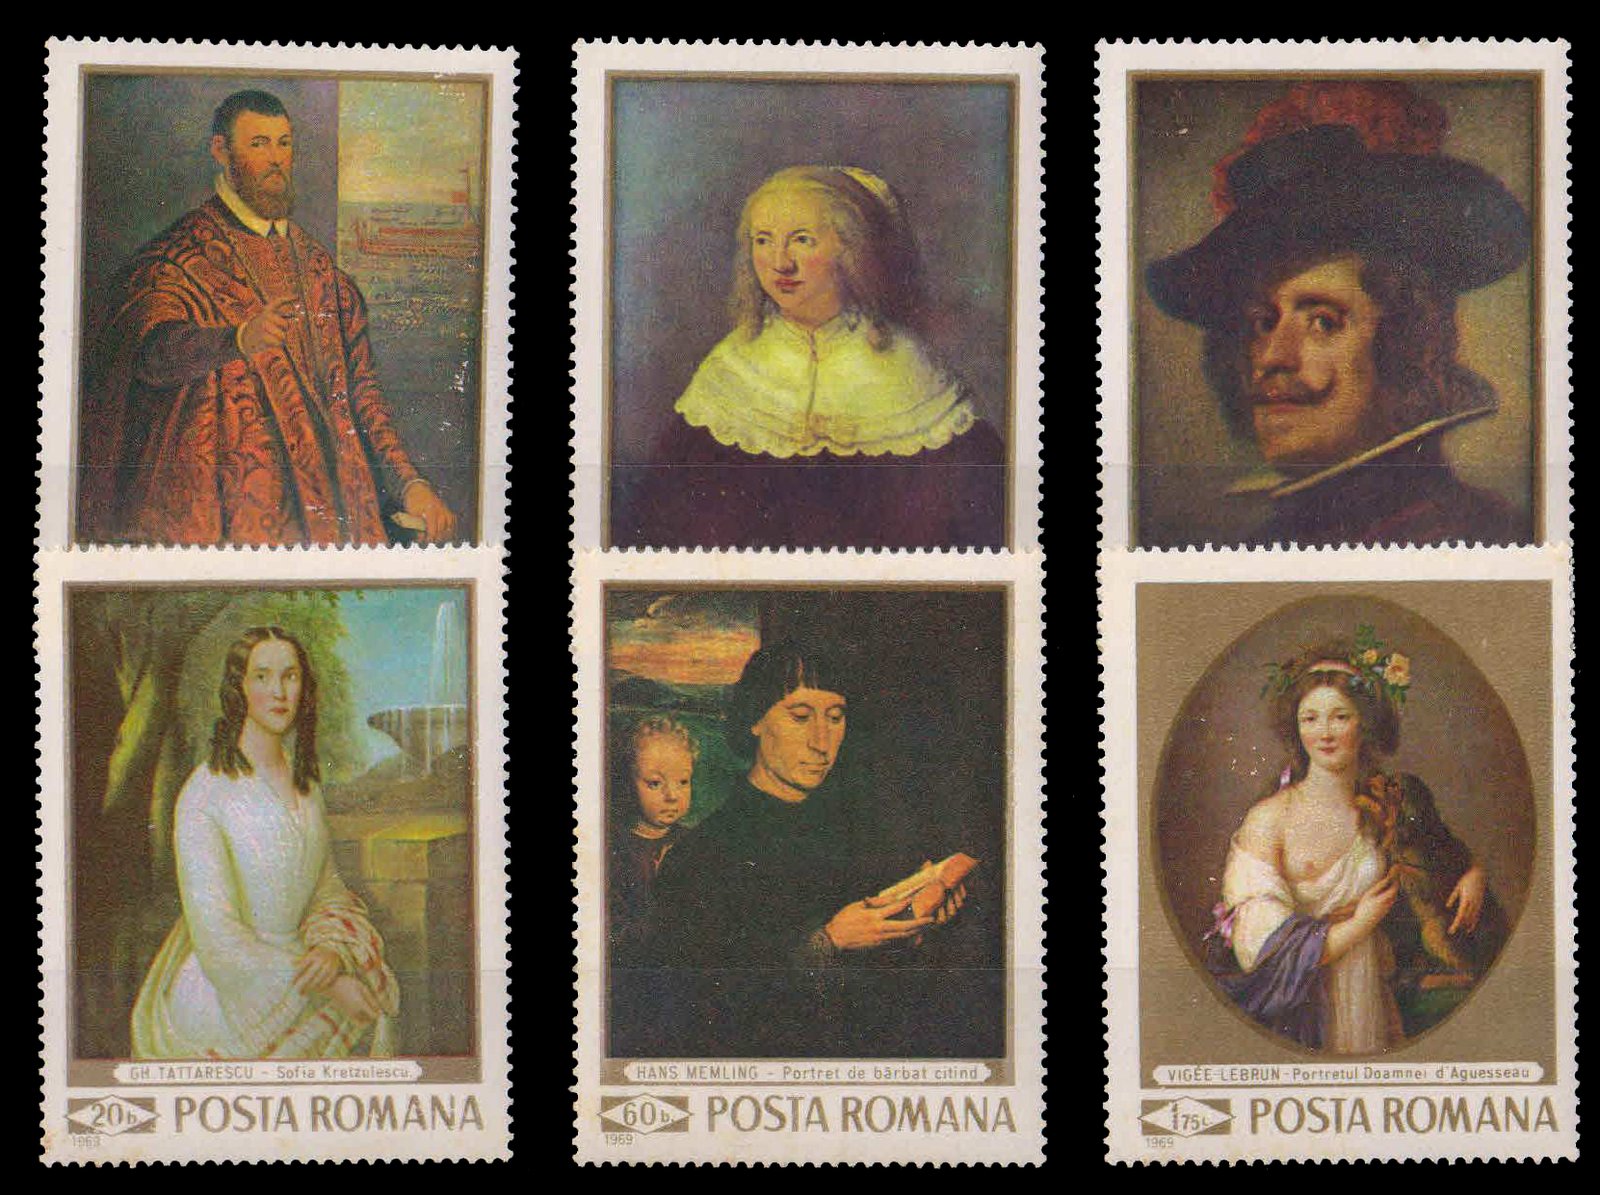 ROMANIA 1969-Paintings in the National Gallery, Bucharest, Set of 6, MNH, S.G. 3658-63-Cat £ 6-